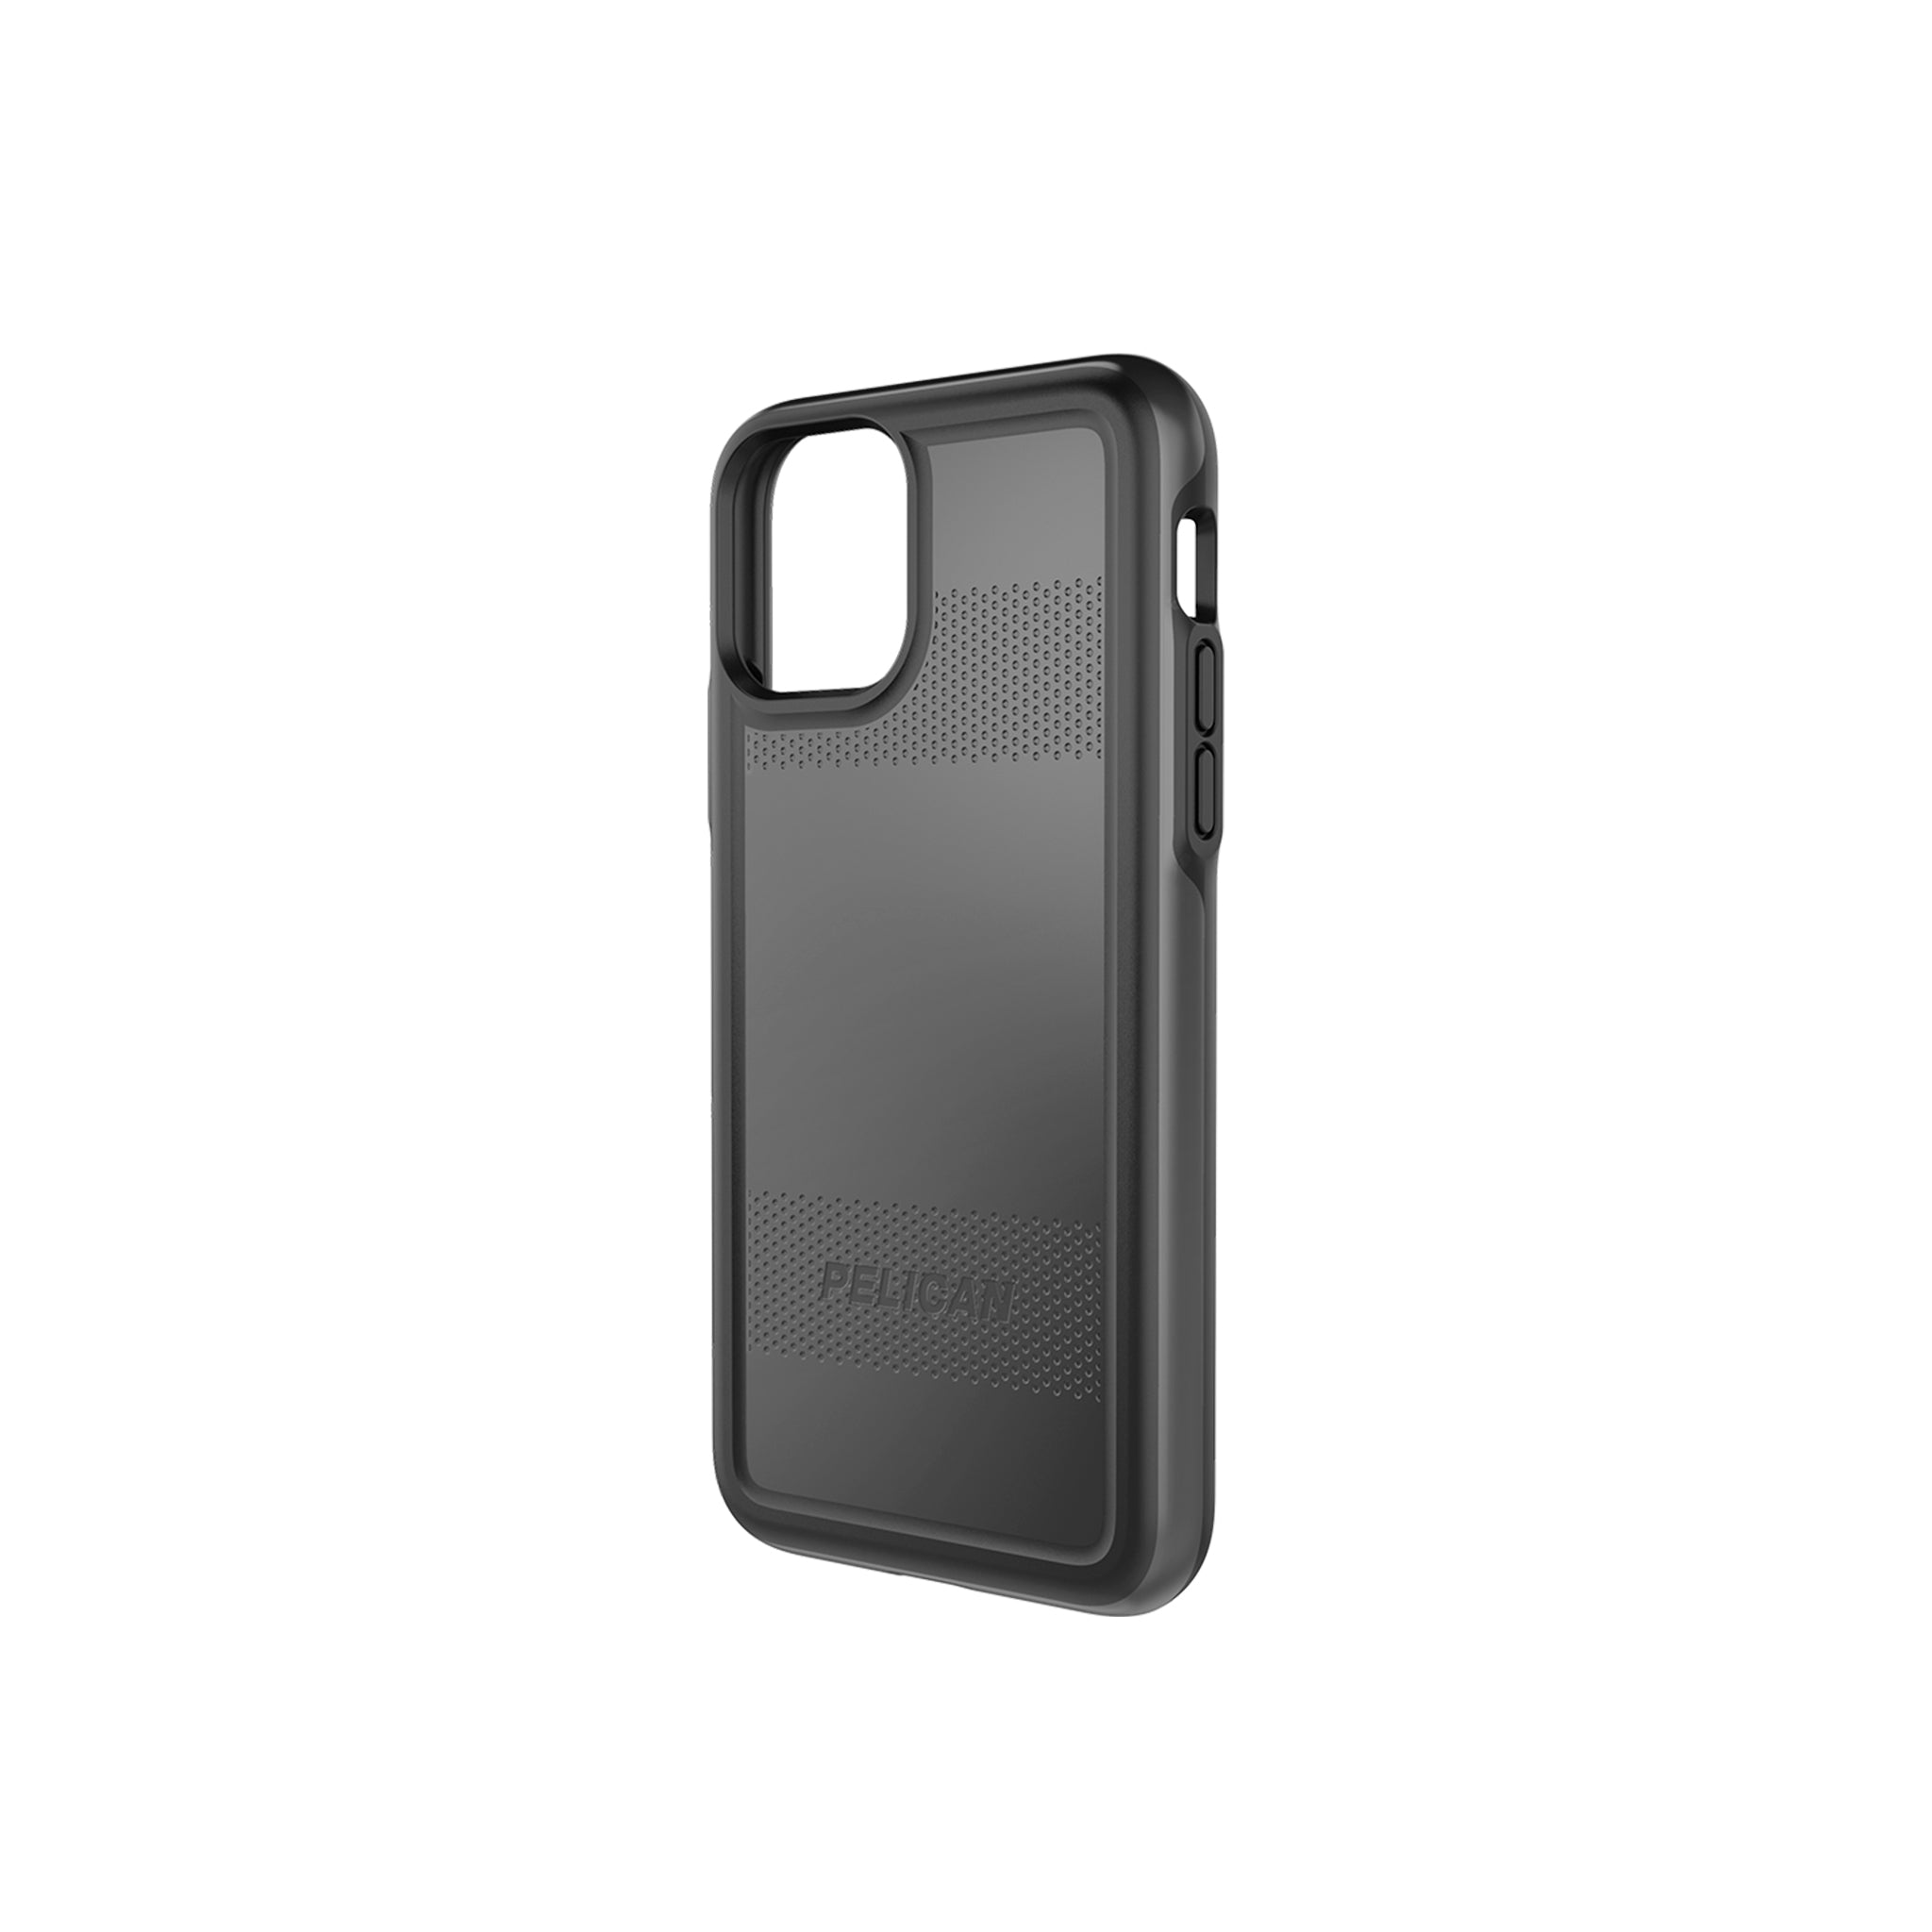 Pelican - Protector Case For Apple iPhone 11 Pro / Xs / X - Black